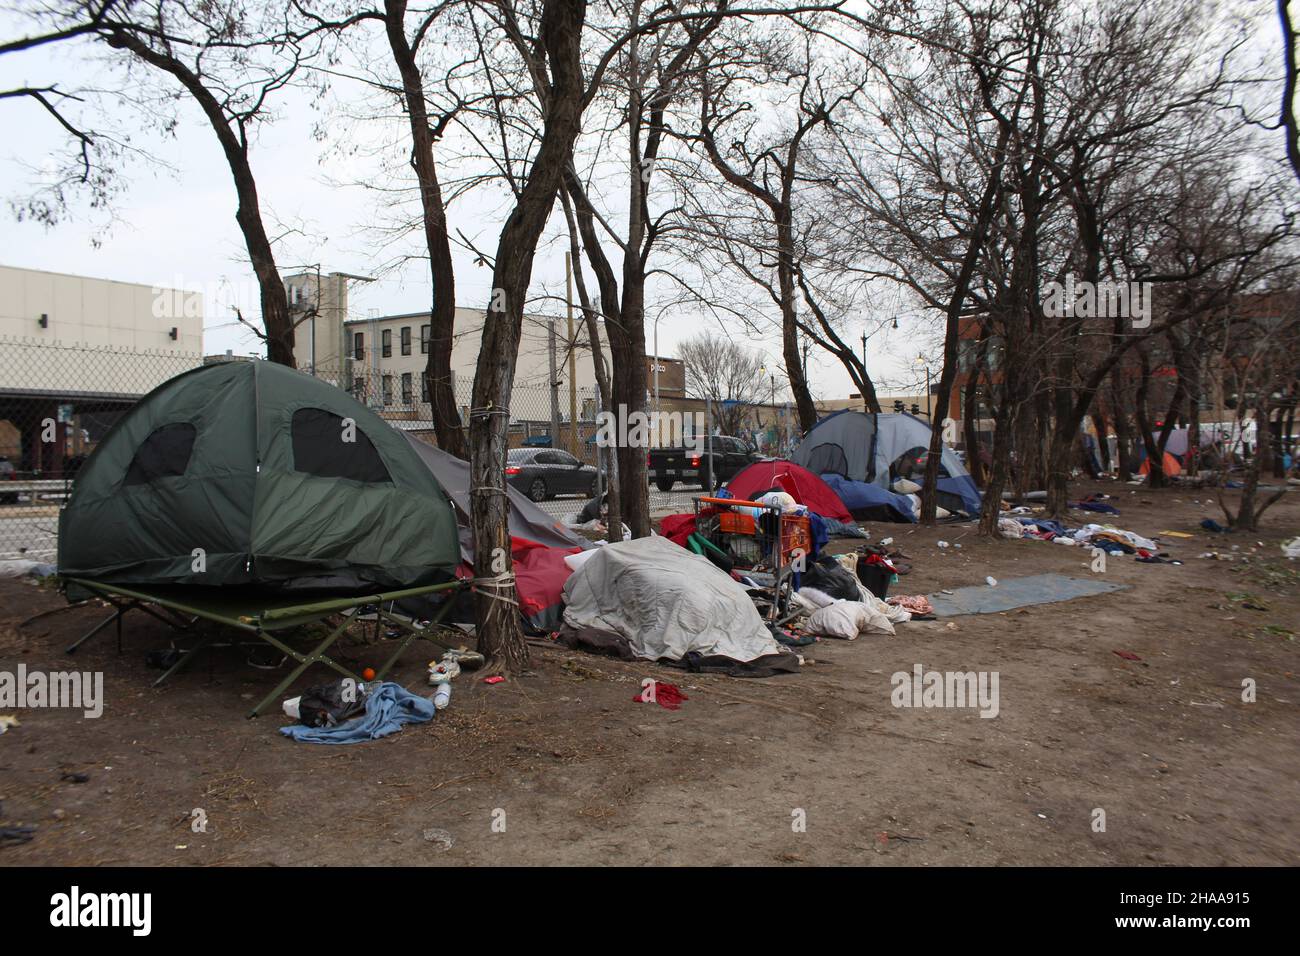 Homeless tent city on Chicago's Near West Side Stock Photo